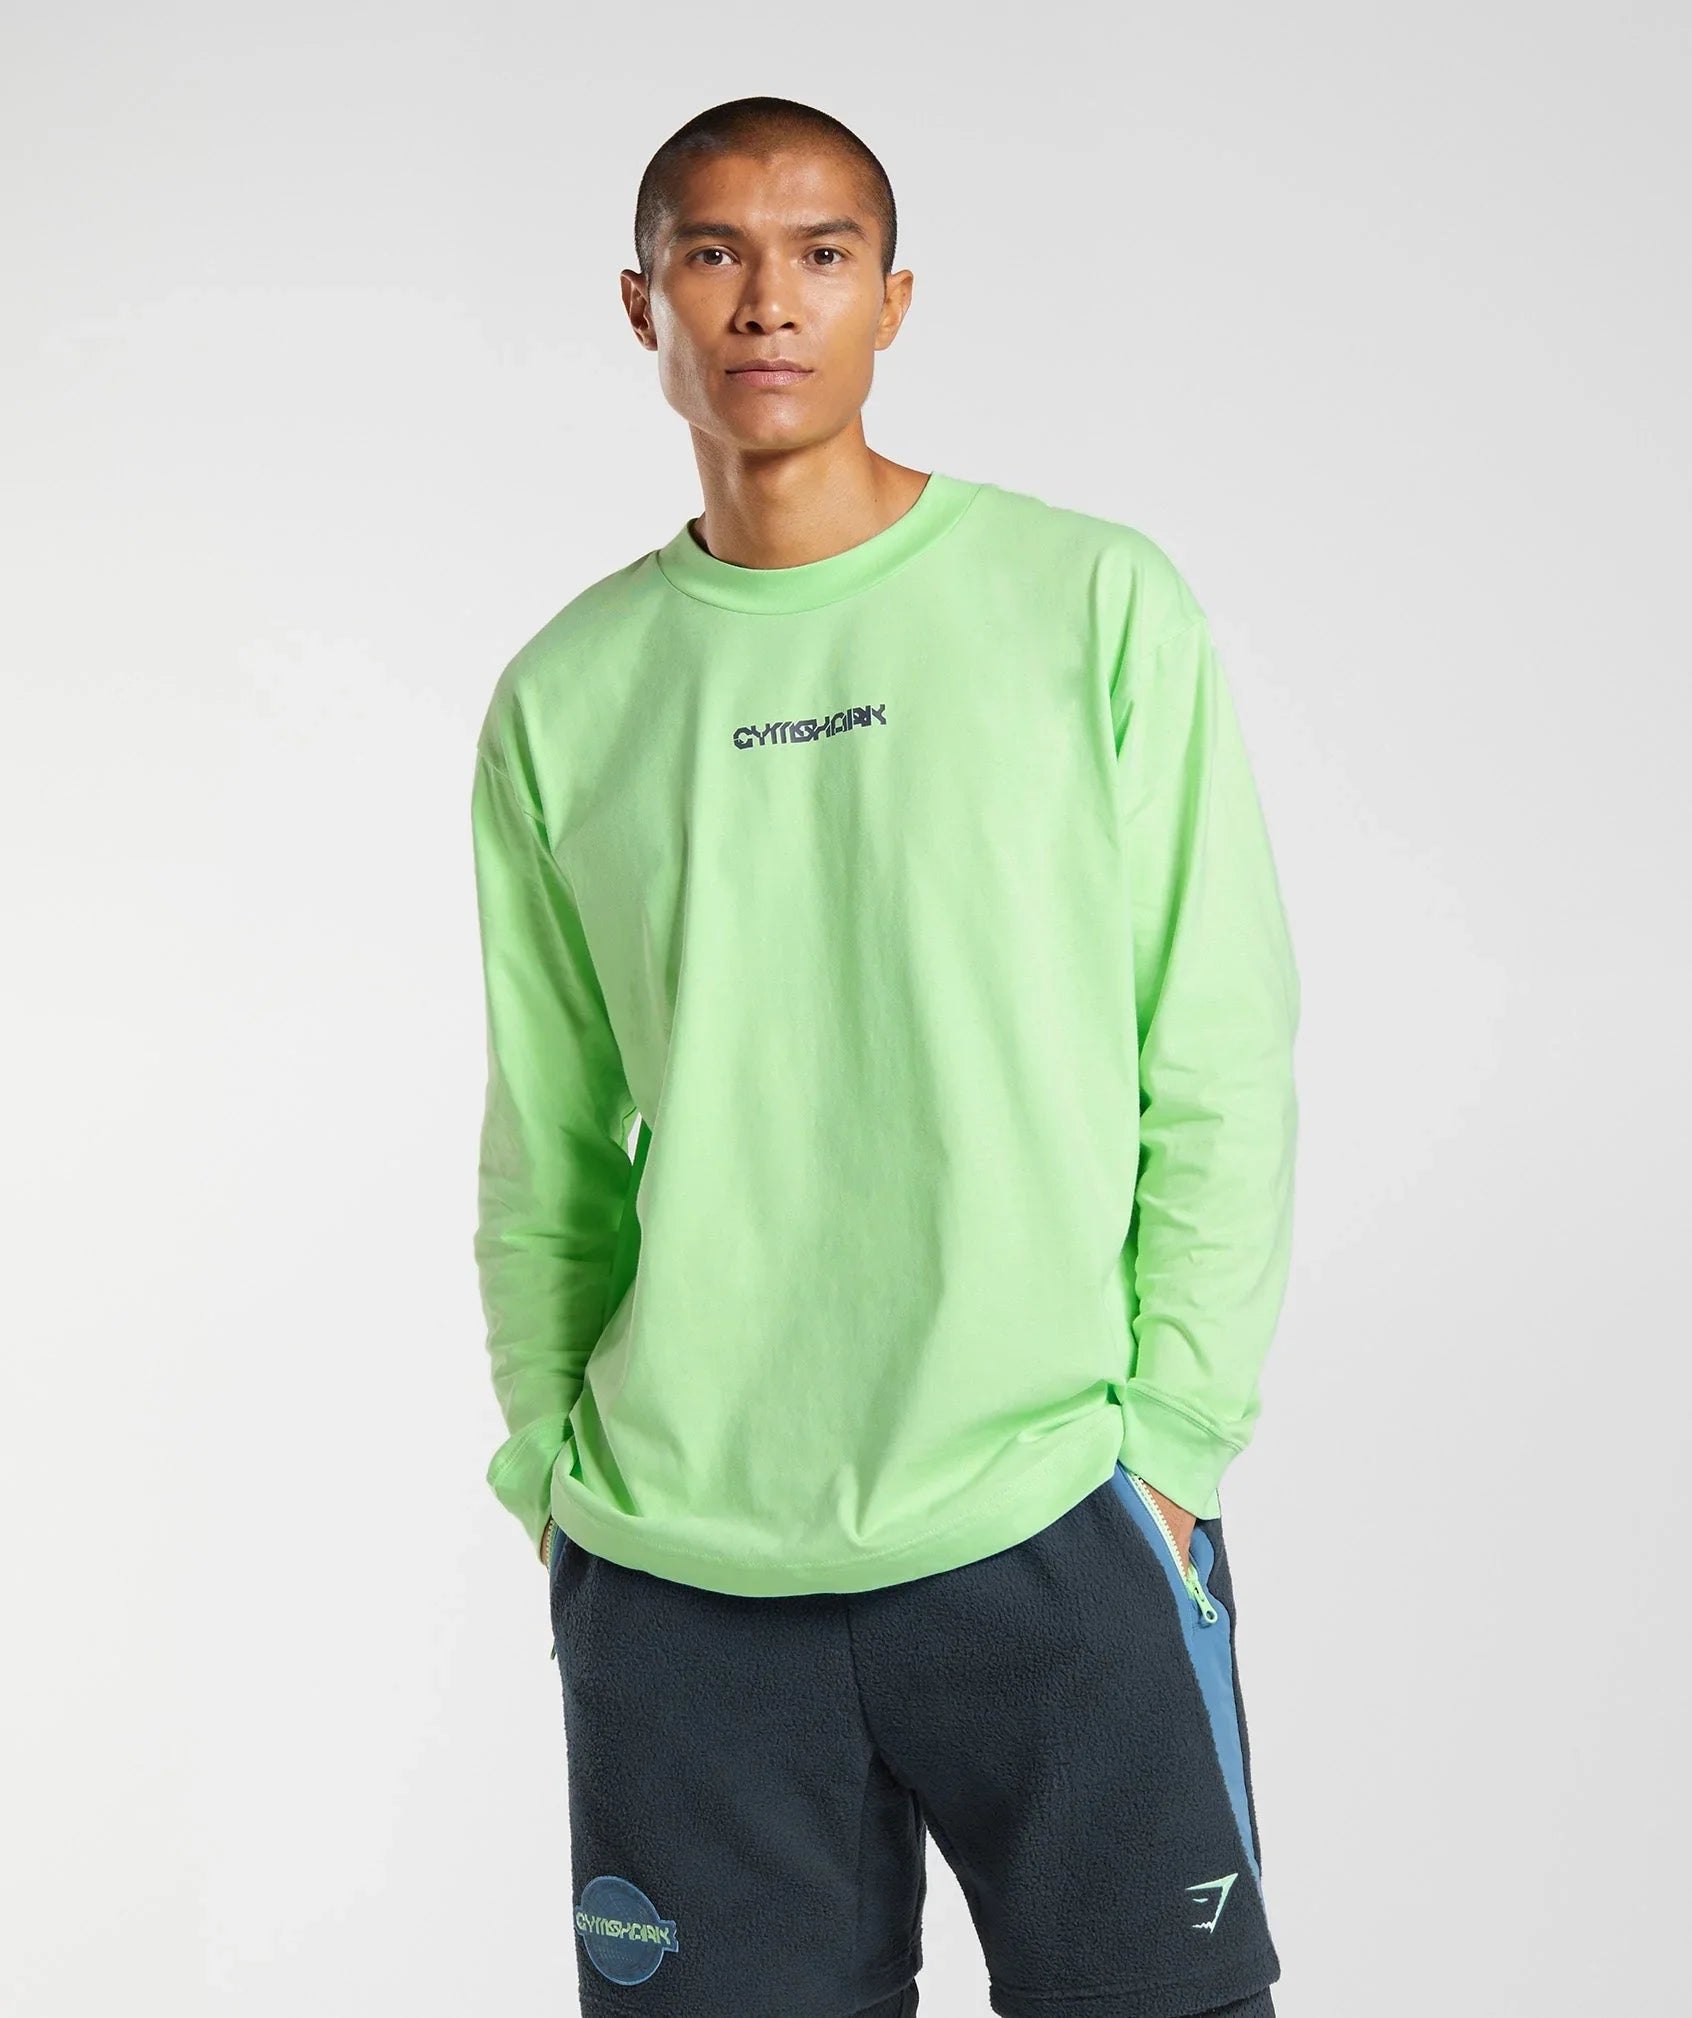 Vibes Long Sleeve T-Shirt in Bright Mint - view 2